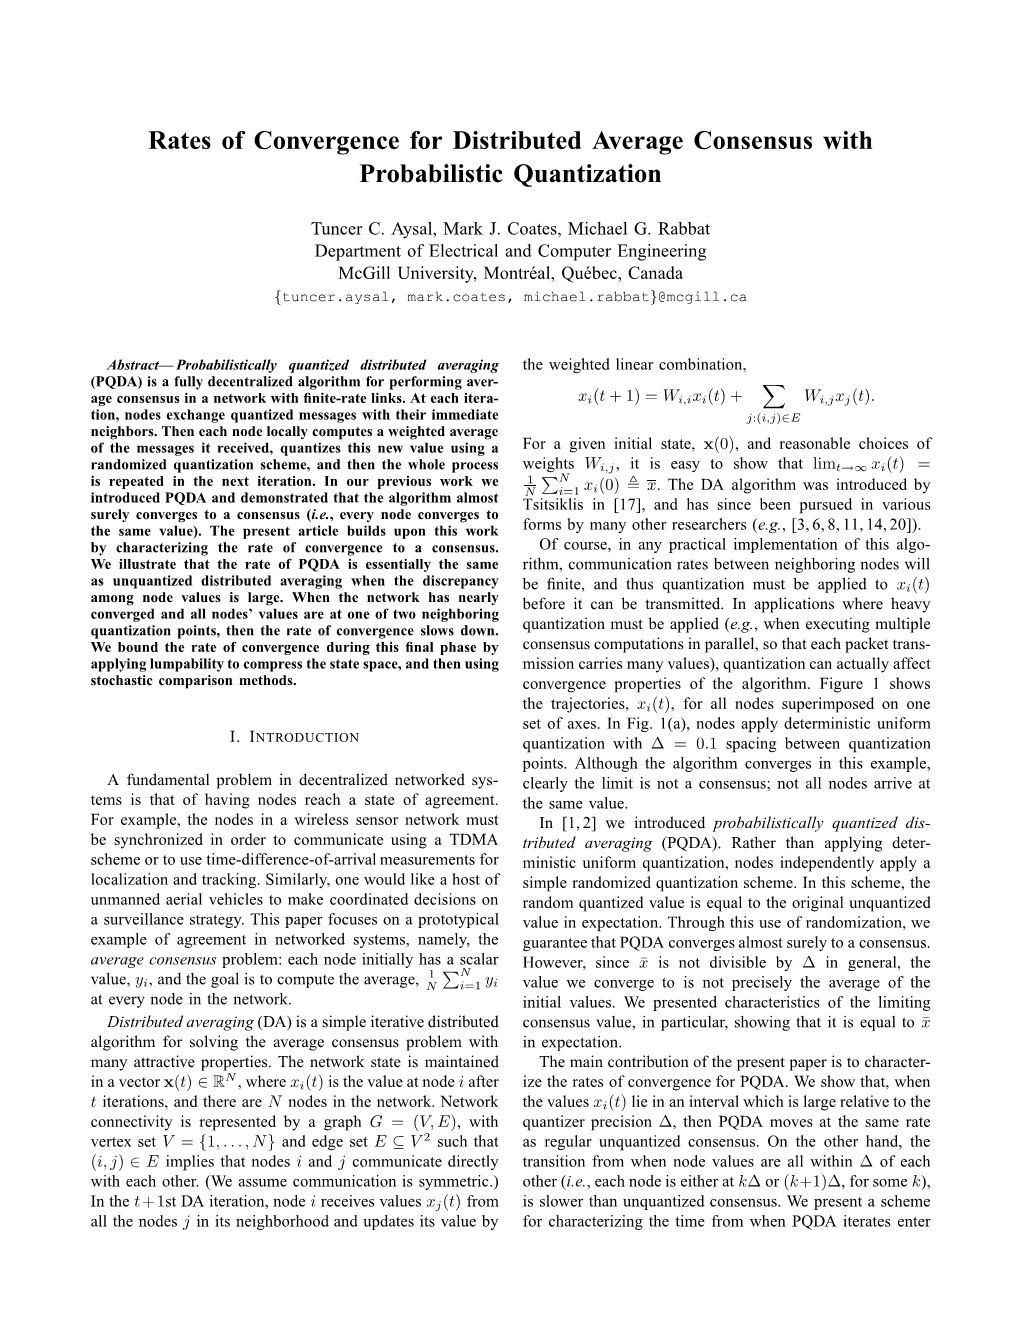 Rates of Convergence for Distributed Average Consensus with Probabilistic Quantization